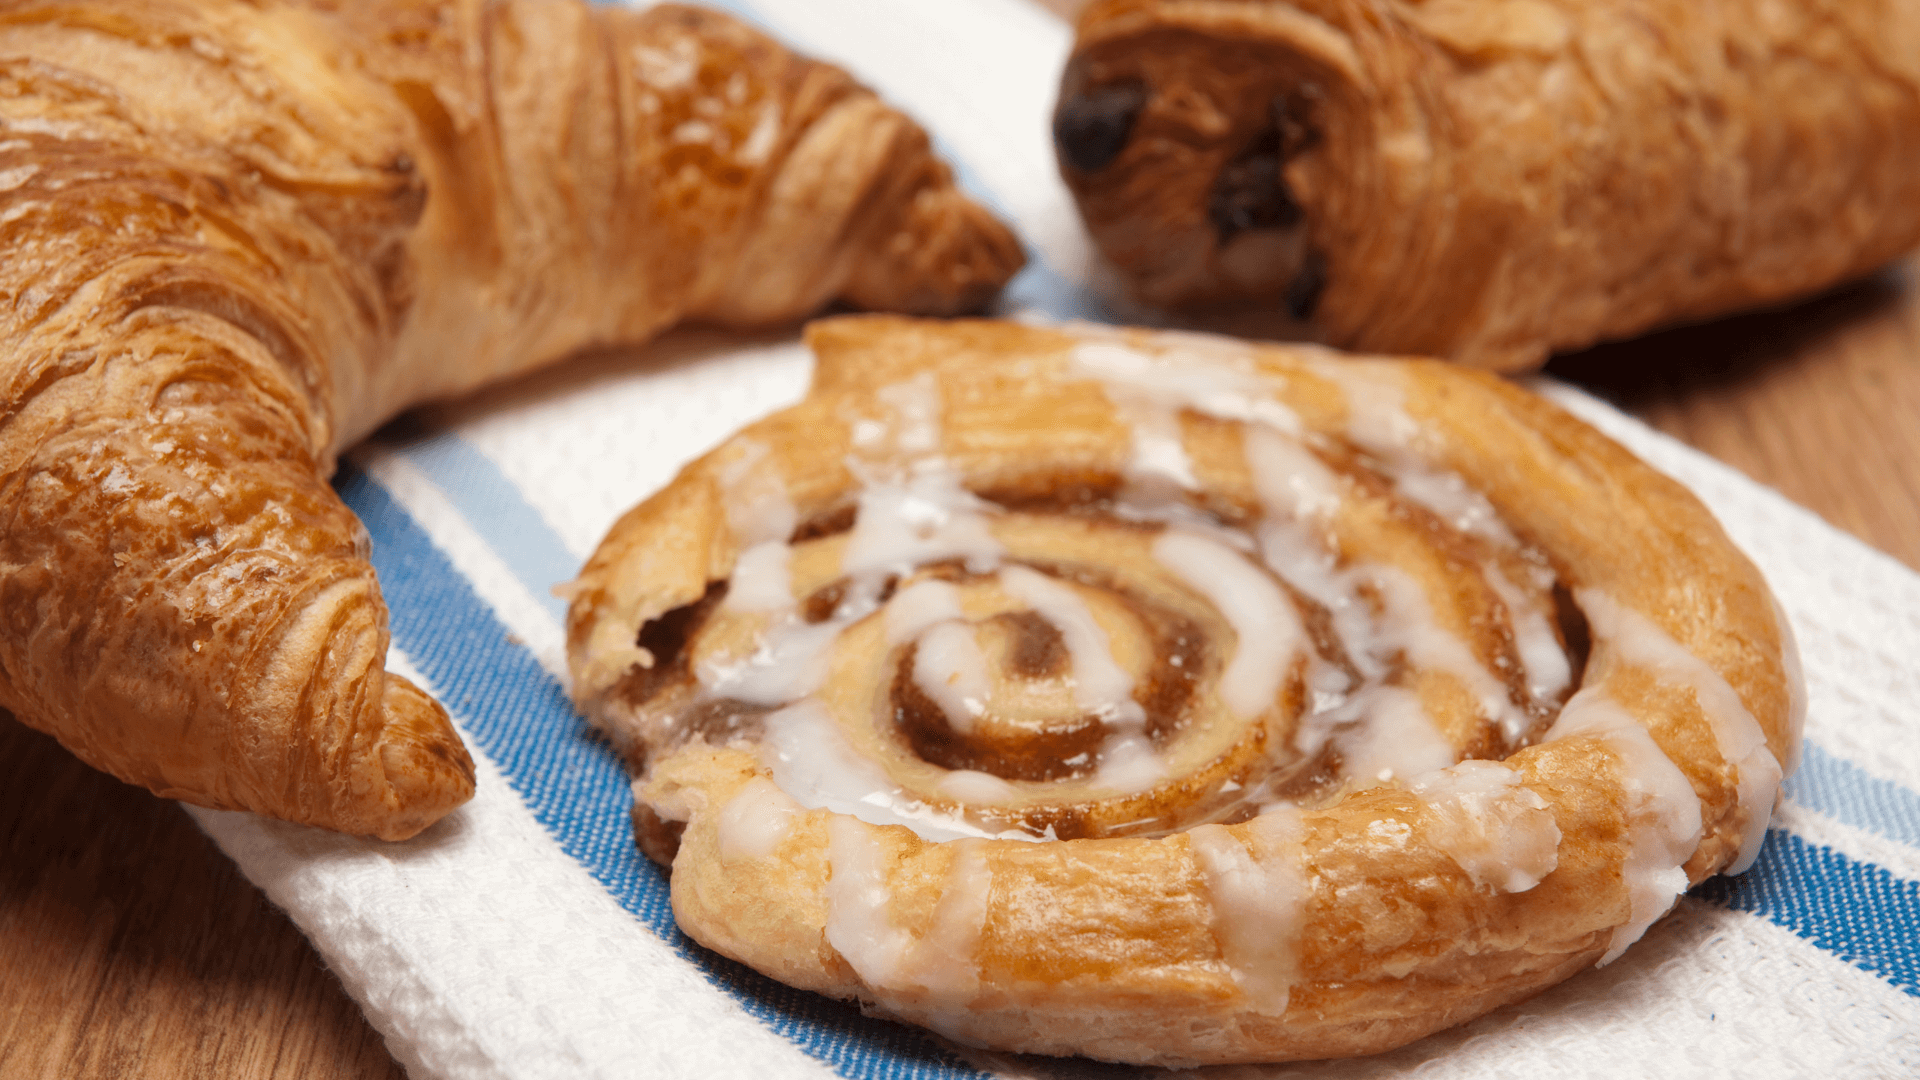 pastries for breakfast